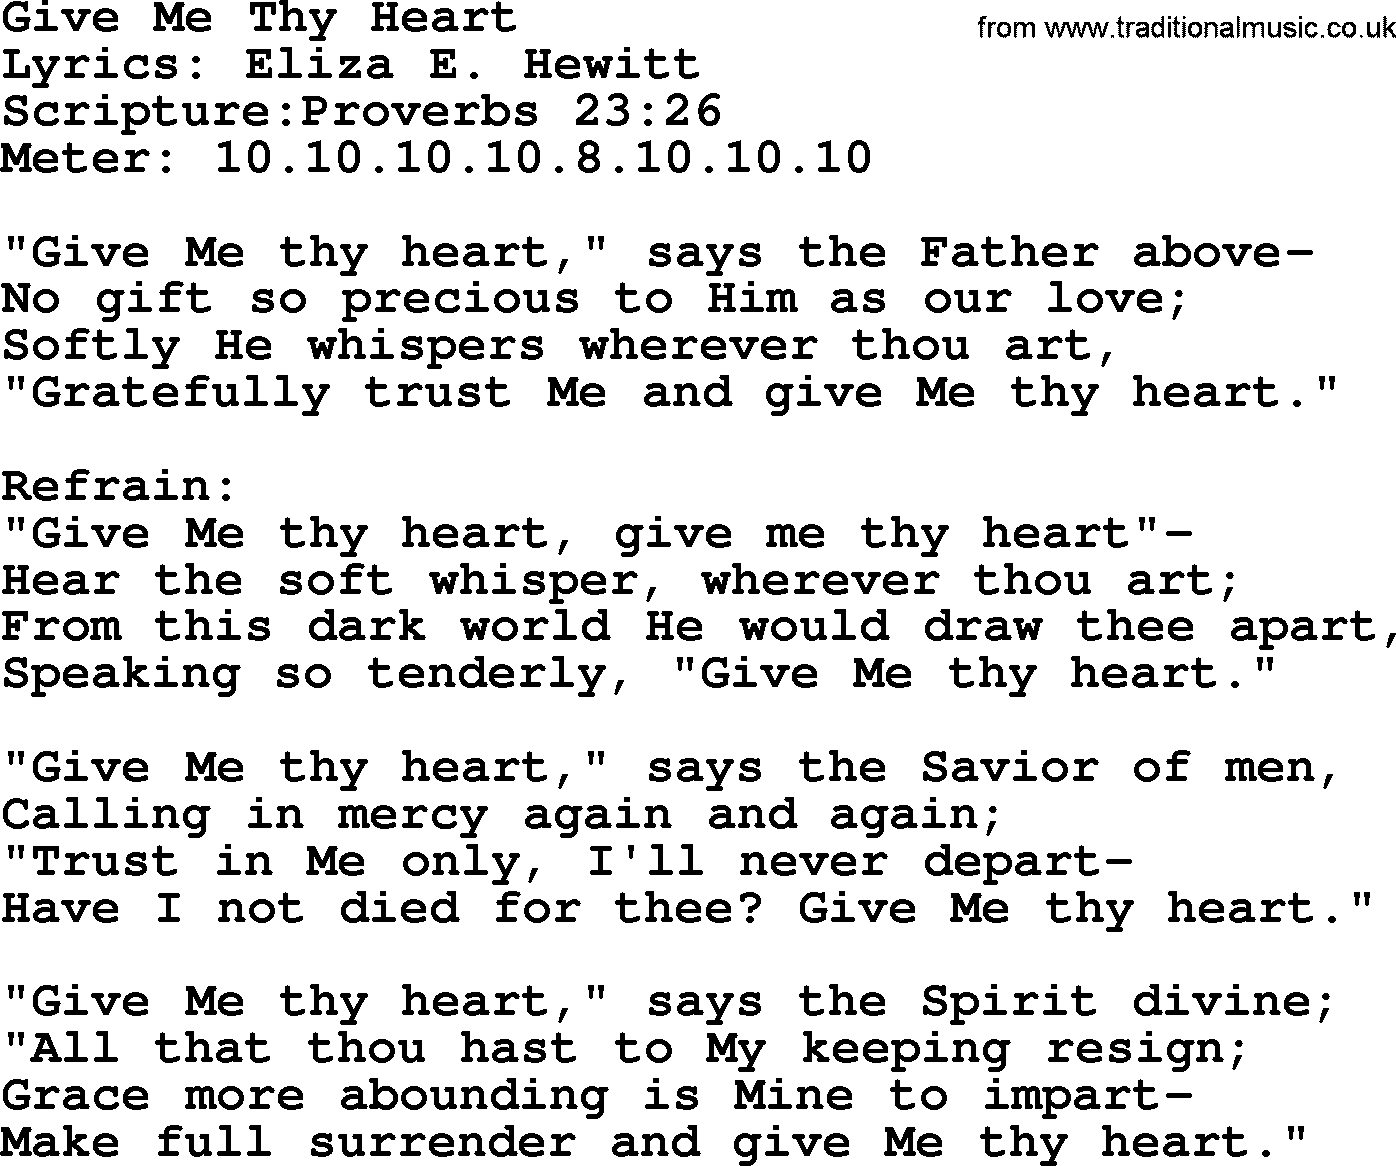 Hymns about  Angels, Hymn: Give Me Thy Heart, lyrics, sheet music, midi & Mp3 music with PDF